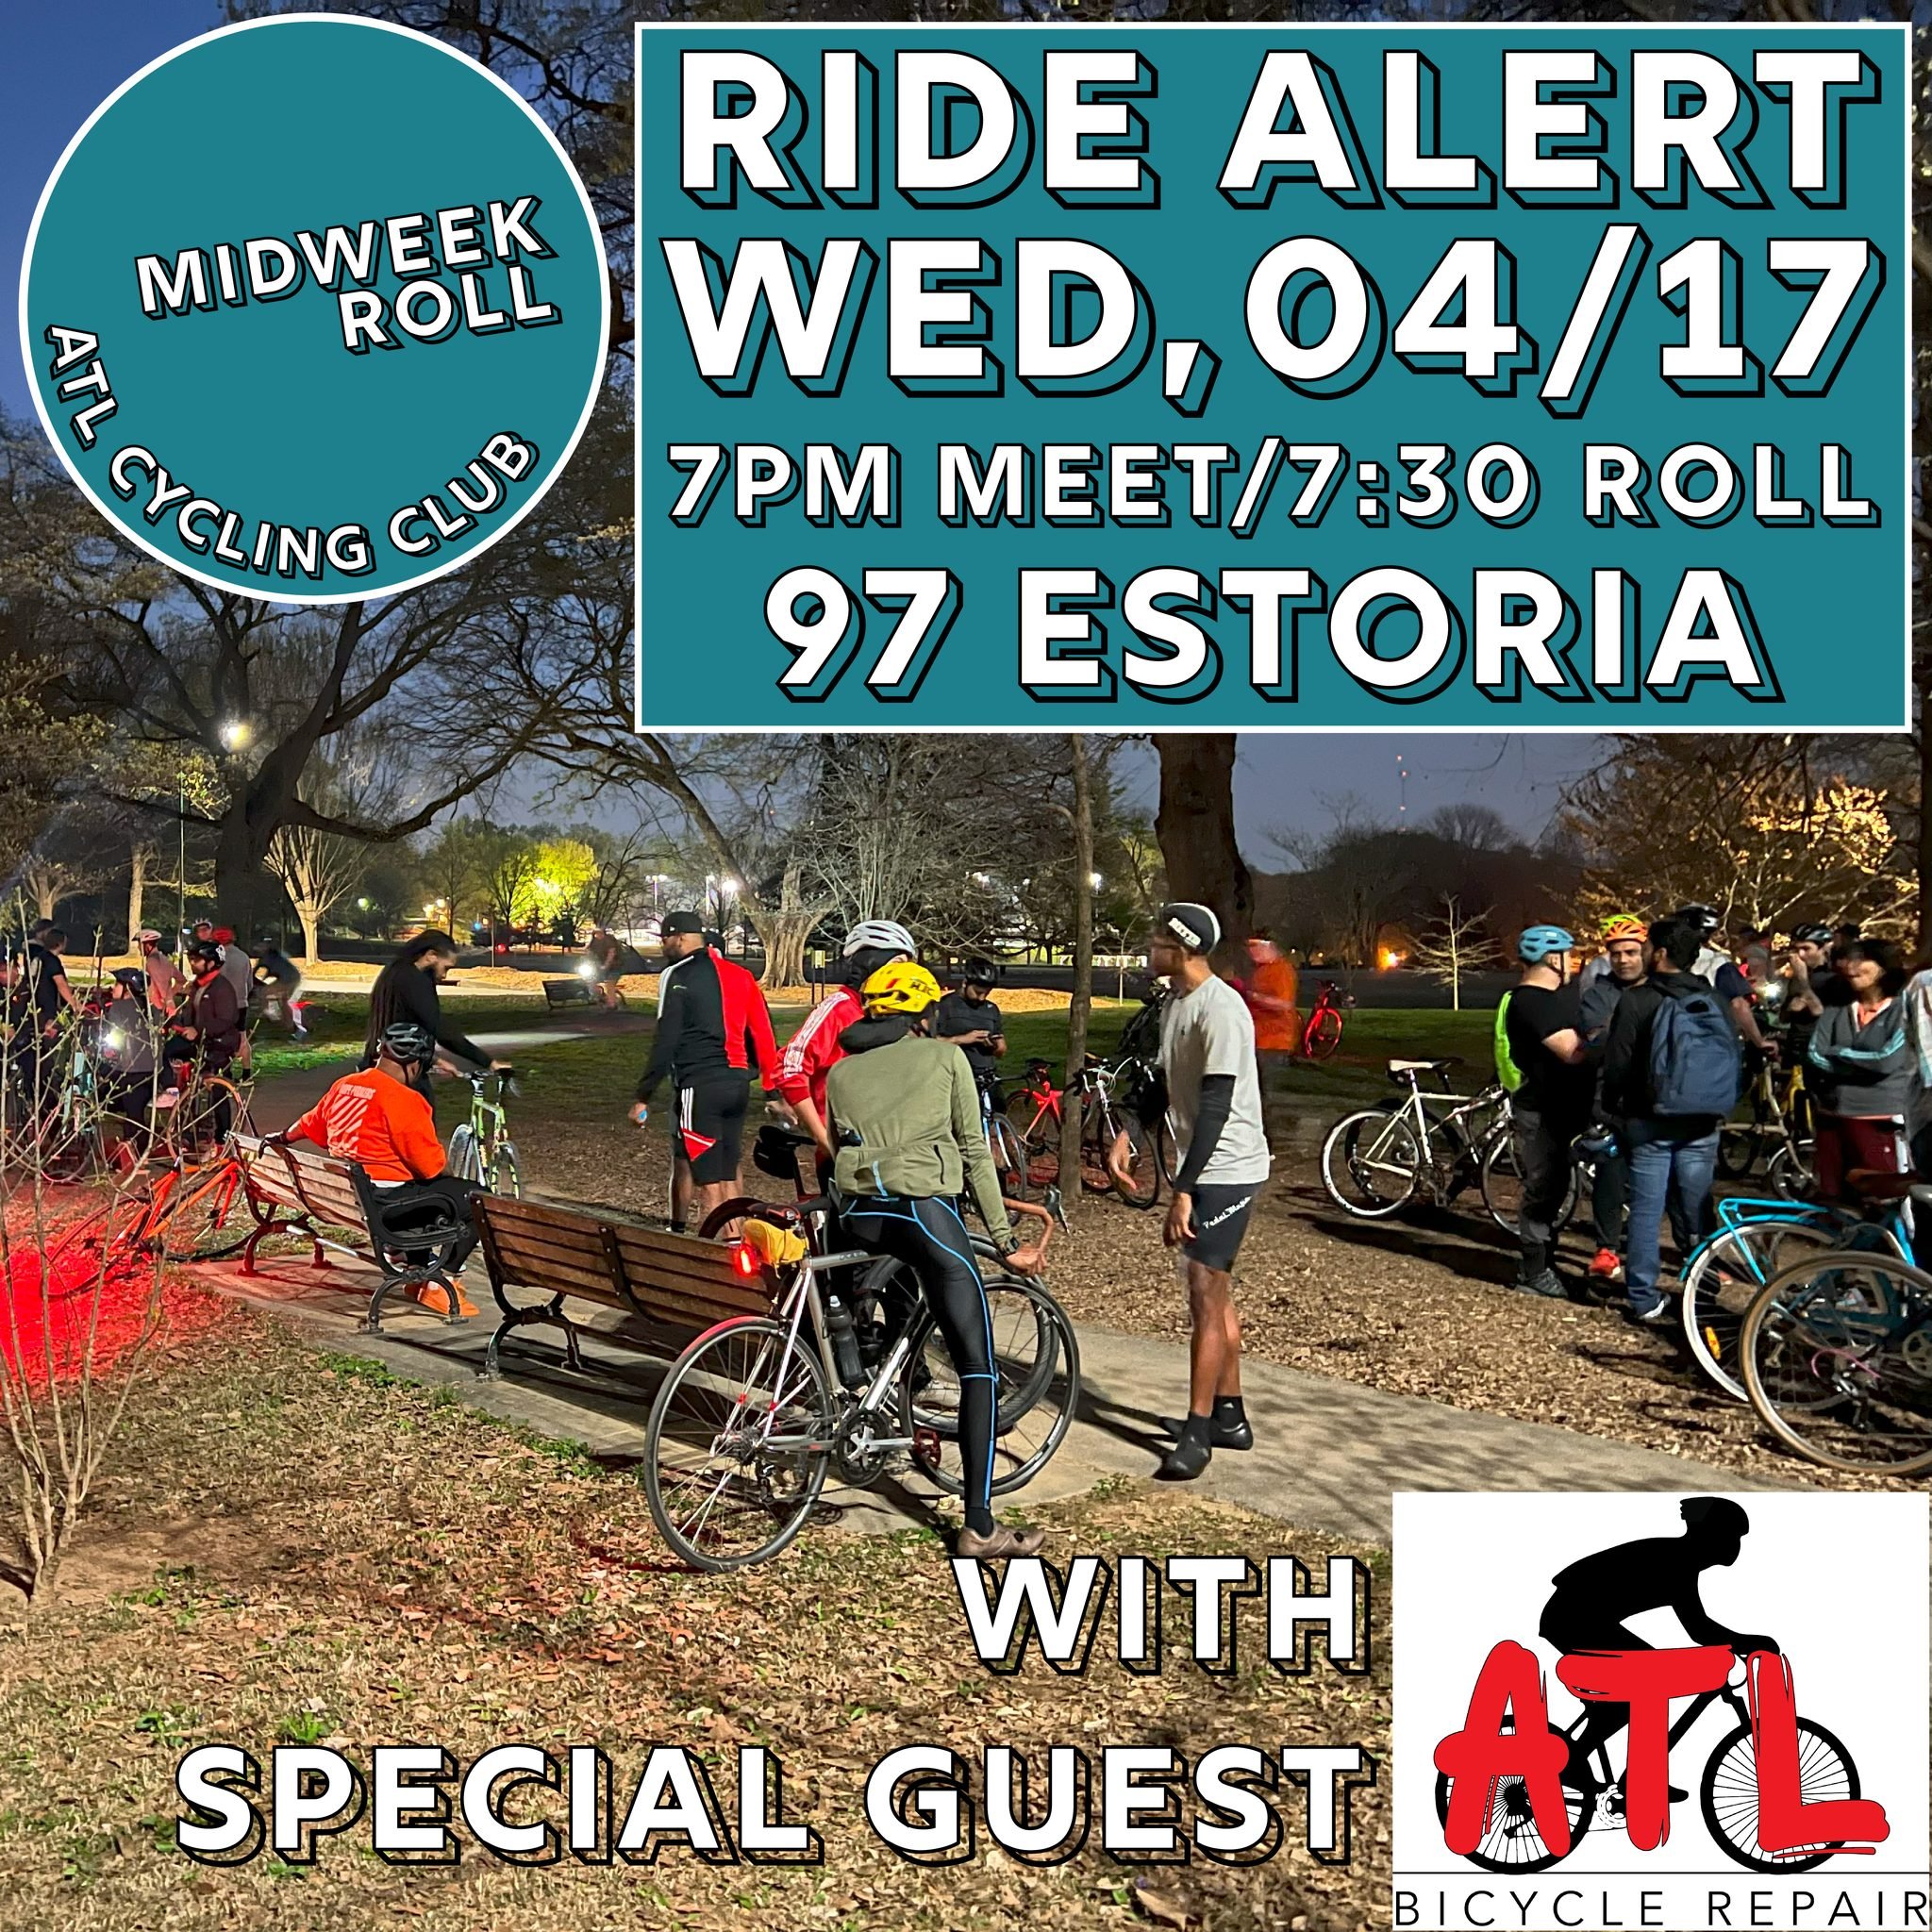 It's Wednesday, so that means MWR is rolling! Join us for a chill ride around town to catch up with old friends and make some new ones. We will be joined by our friends @atlbicyclerepair for a tag team ride.

They will have their van parked at 97 Est